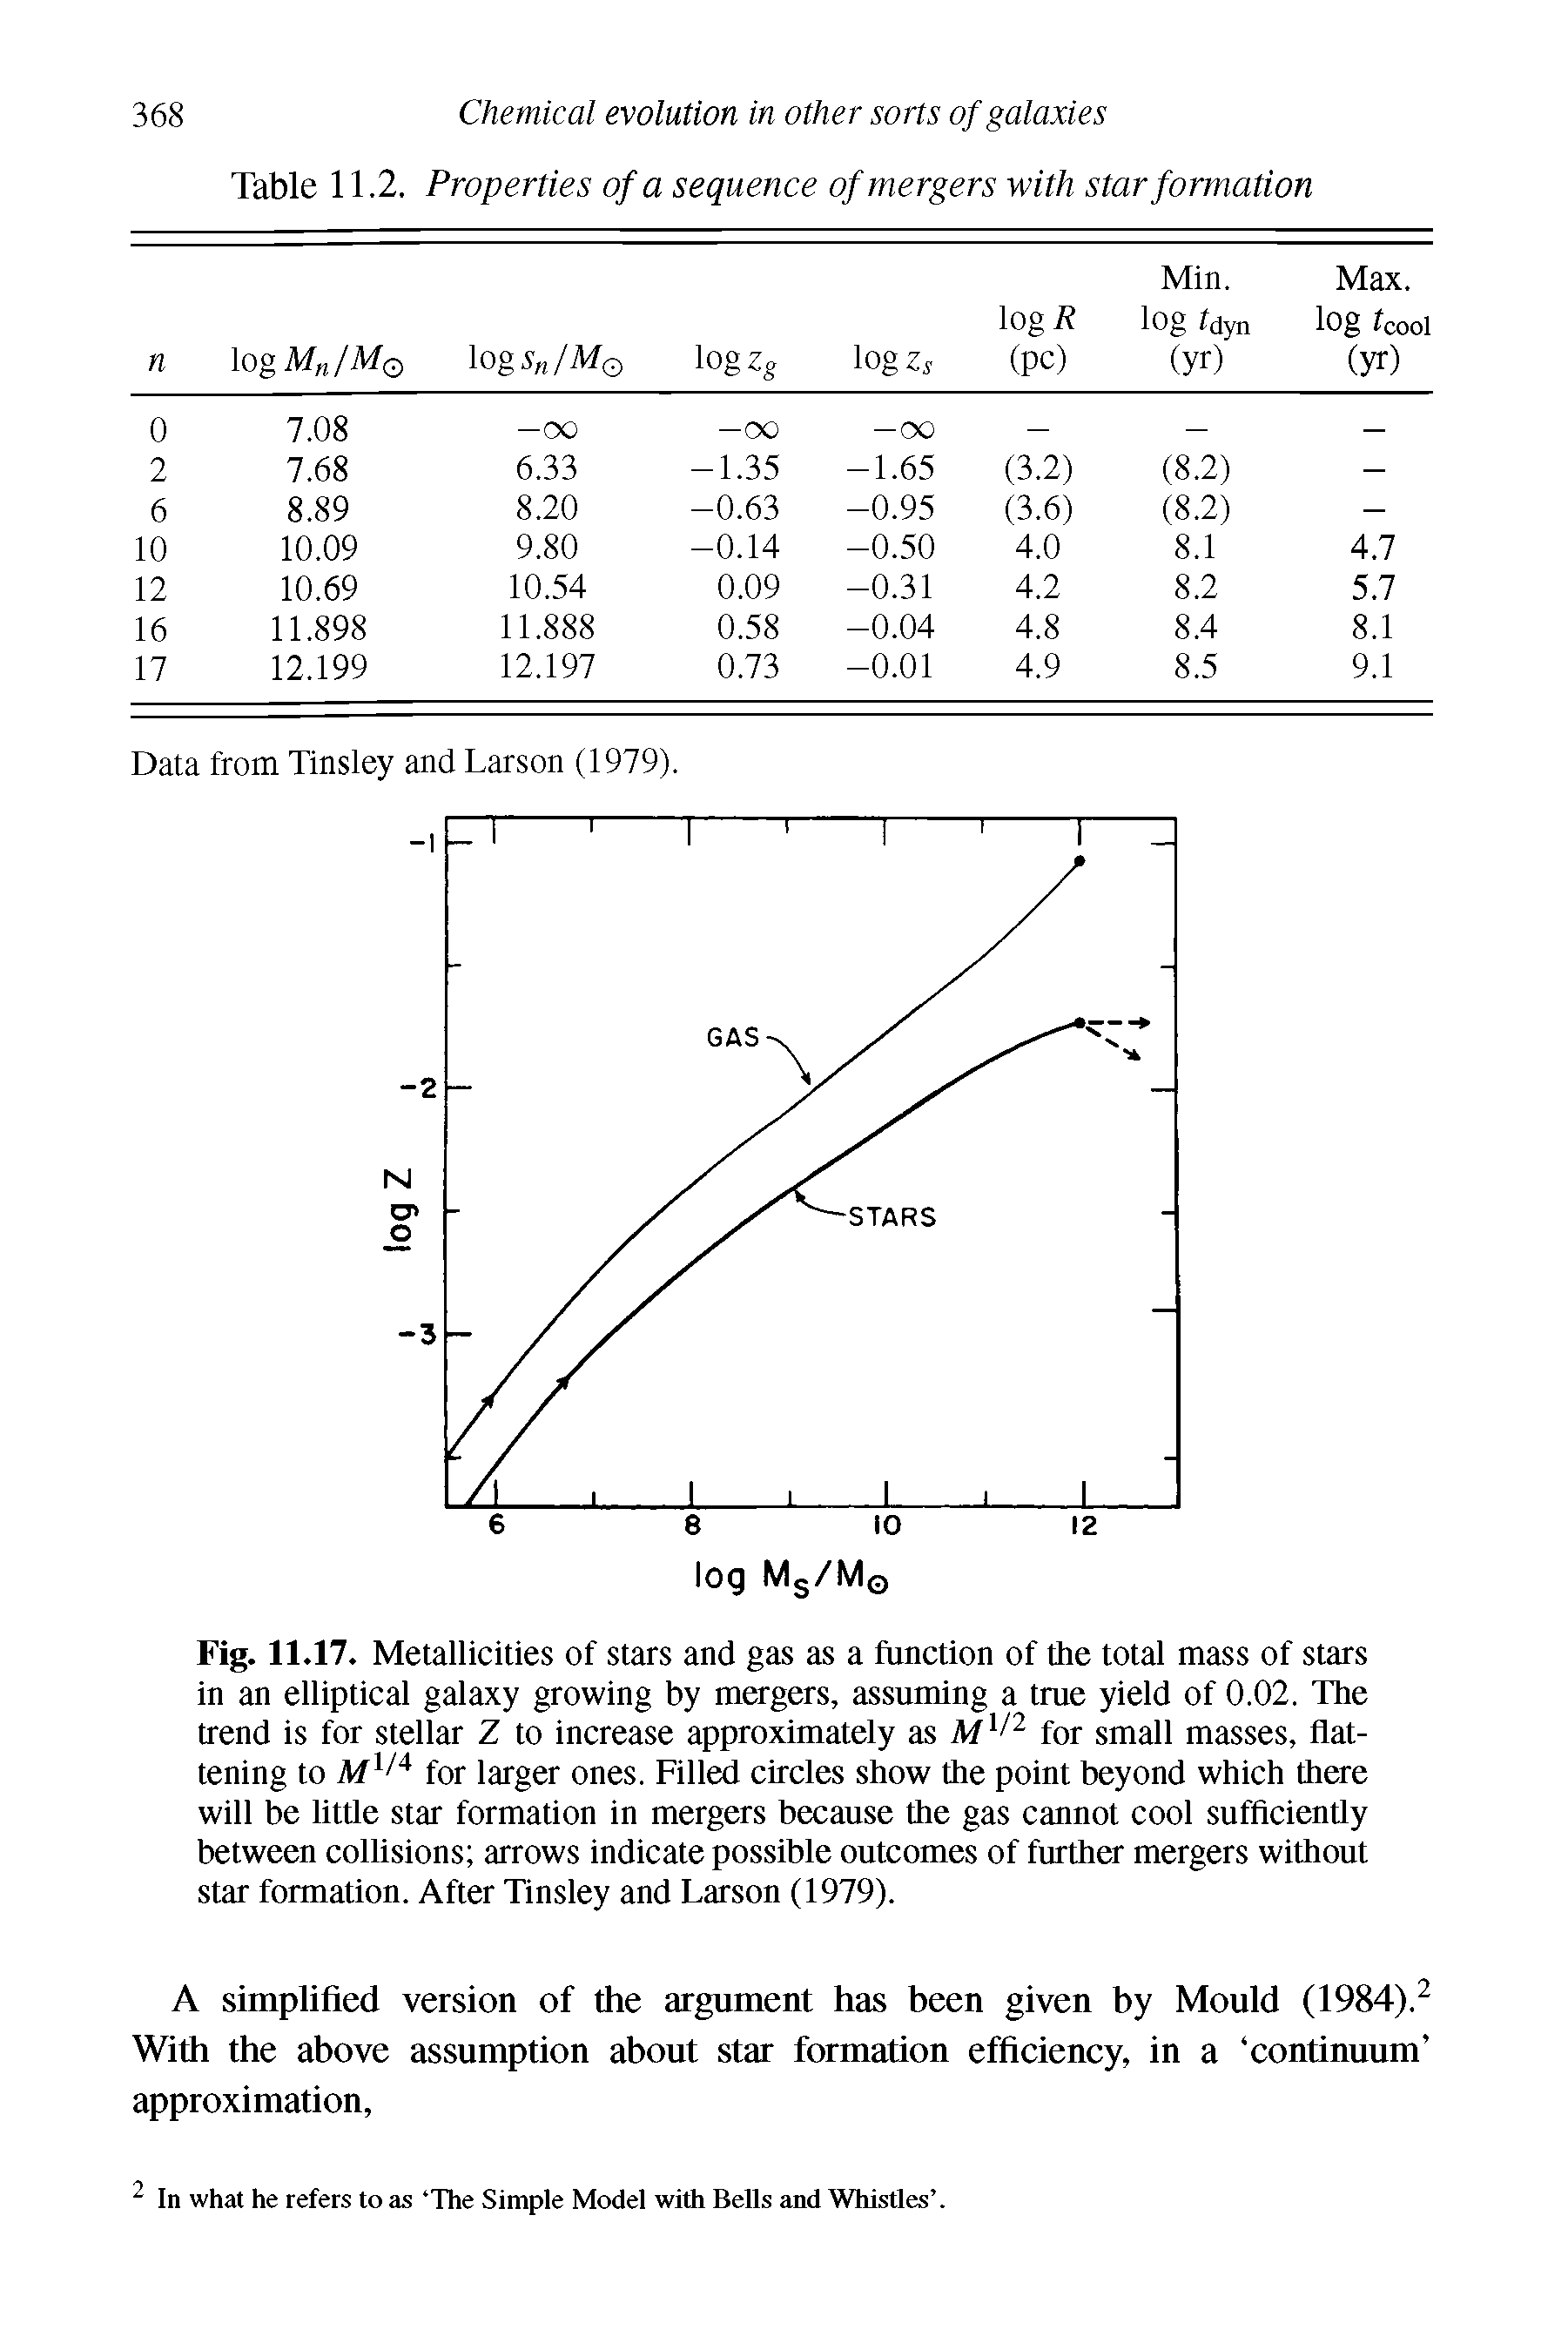 Fig. 11.17. Metallicities of stars and gas as a function of the total mass of stars in an elliptical galaxy growing by mergers, assuming a true yield of 0.02. The trend is for stellar Z to increase approximately as A/1/2 for small masses, flattening to Af1/4 for larger ones. Filled circles show the point beyond which there will be little star formation in mergers because the gas cannot cool sufficiently between collisions arrows indicate possible outcomes of further mergers without star formation. After Tinsley and Larson (1979).